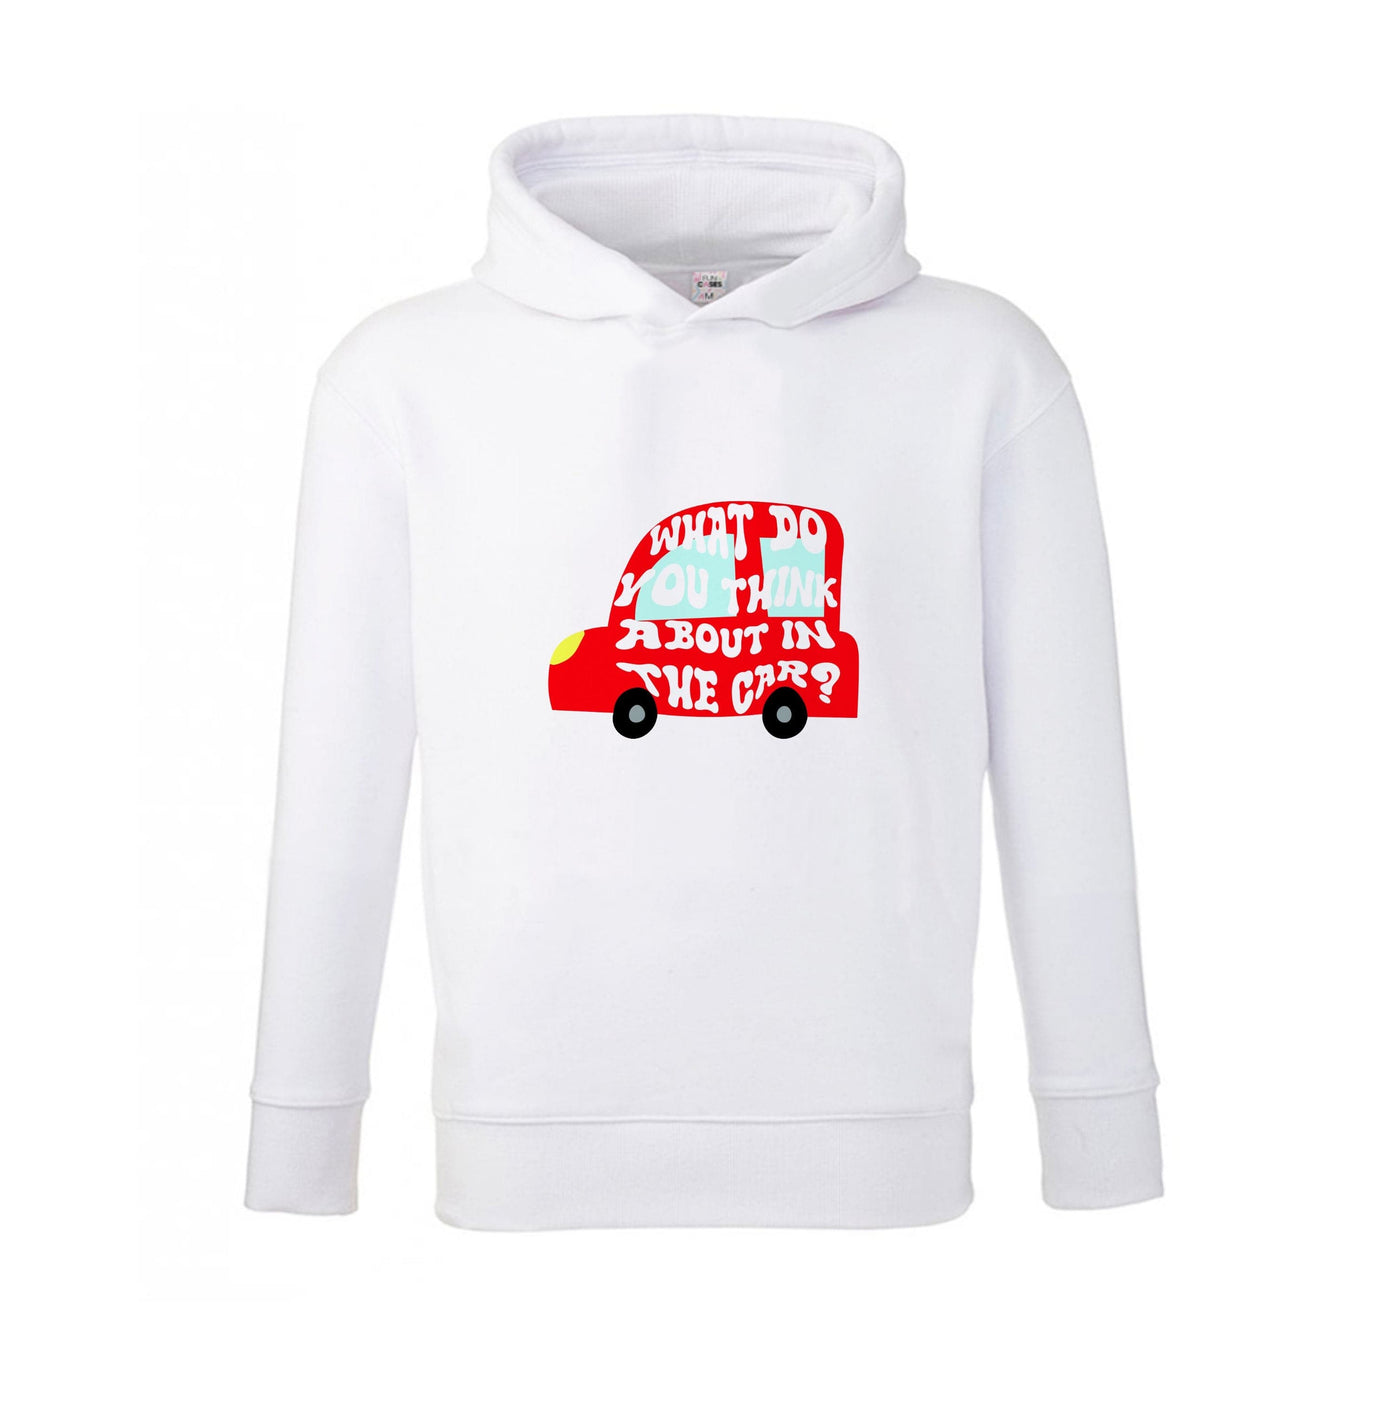 What Do You Think About In The Car? - Declan Mckenna Kids Hoodie